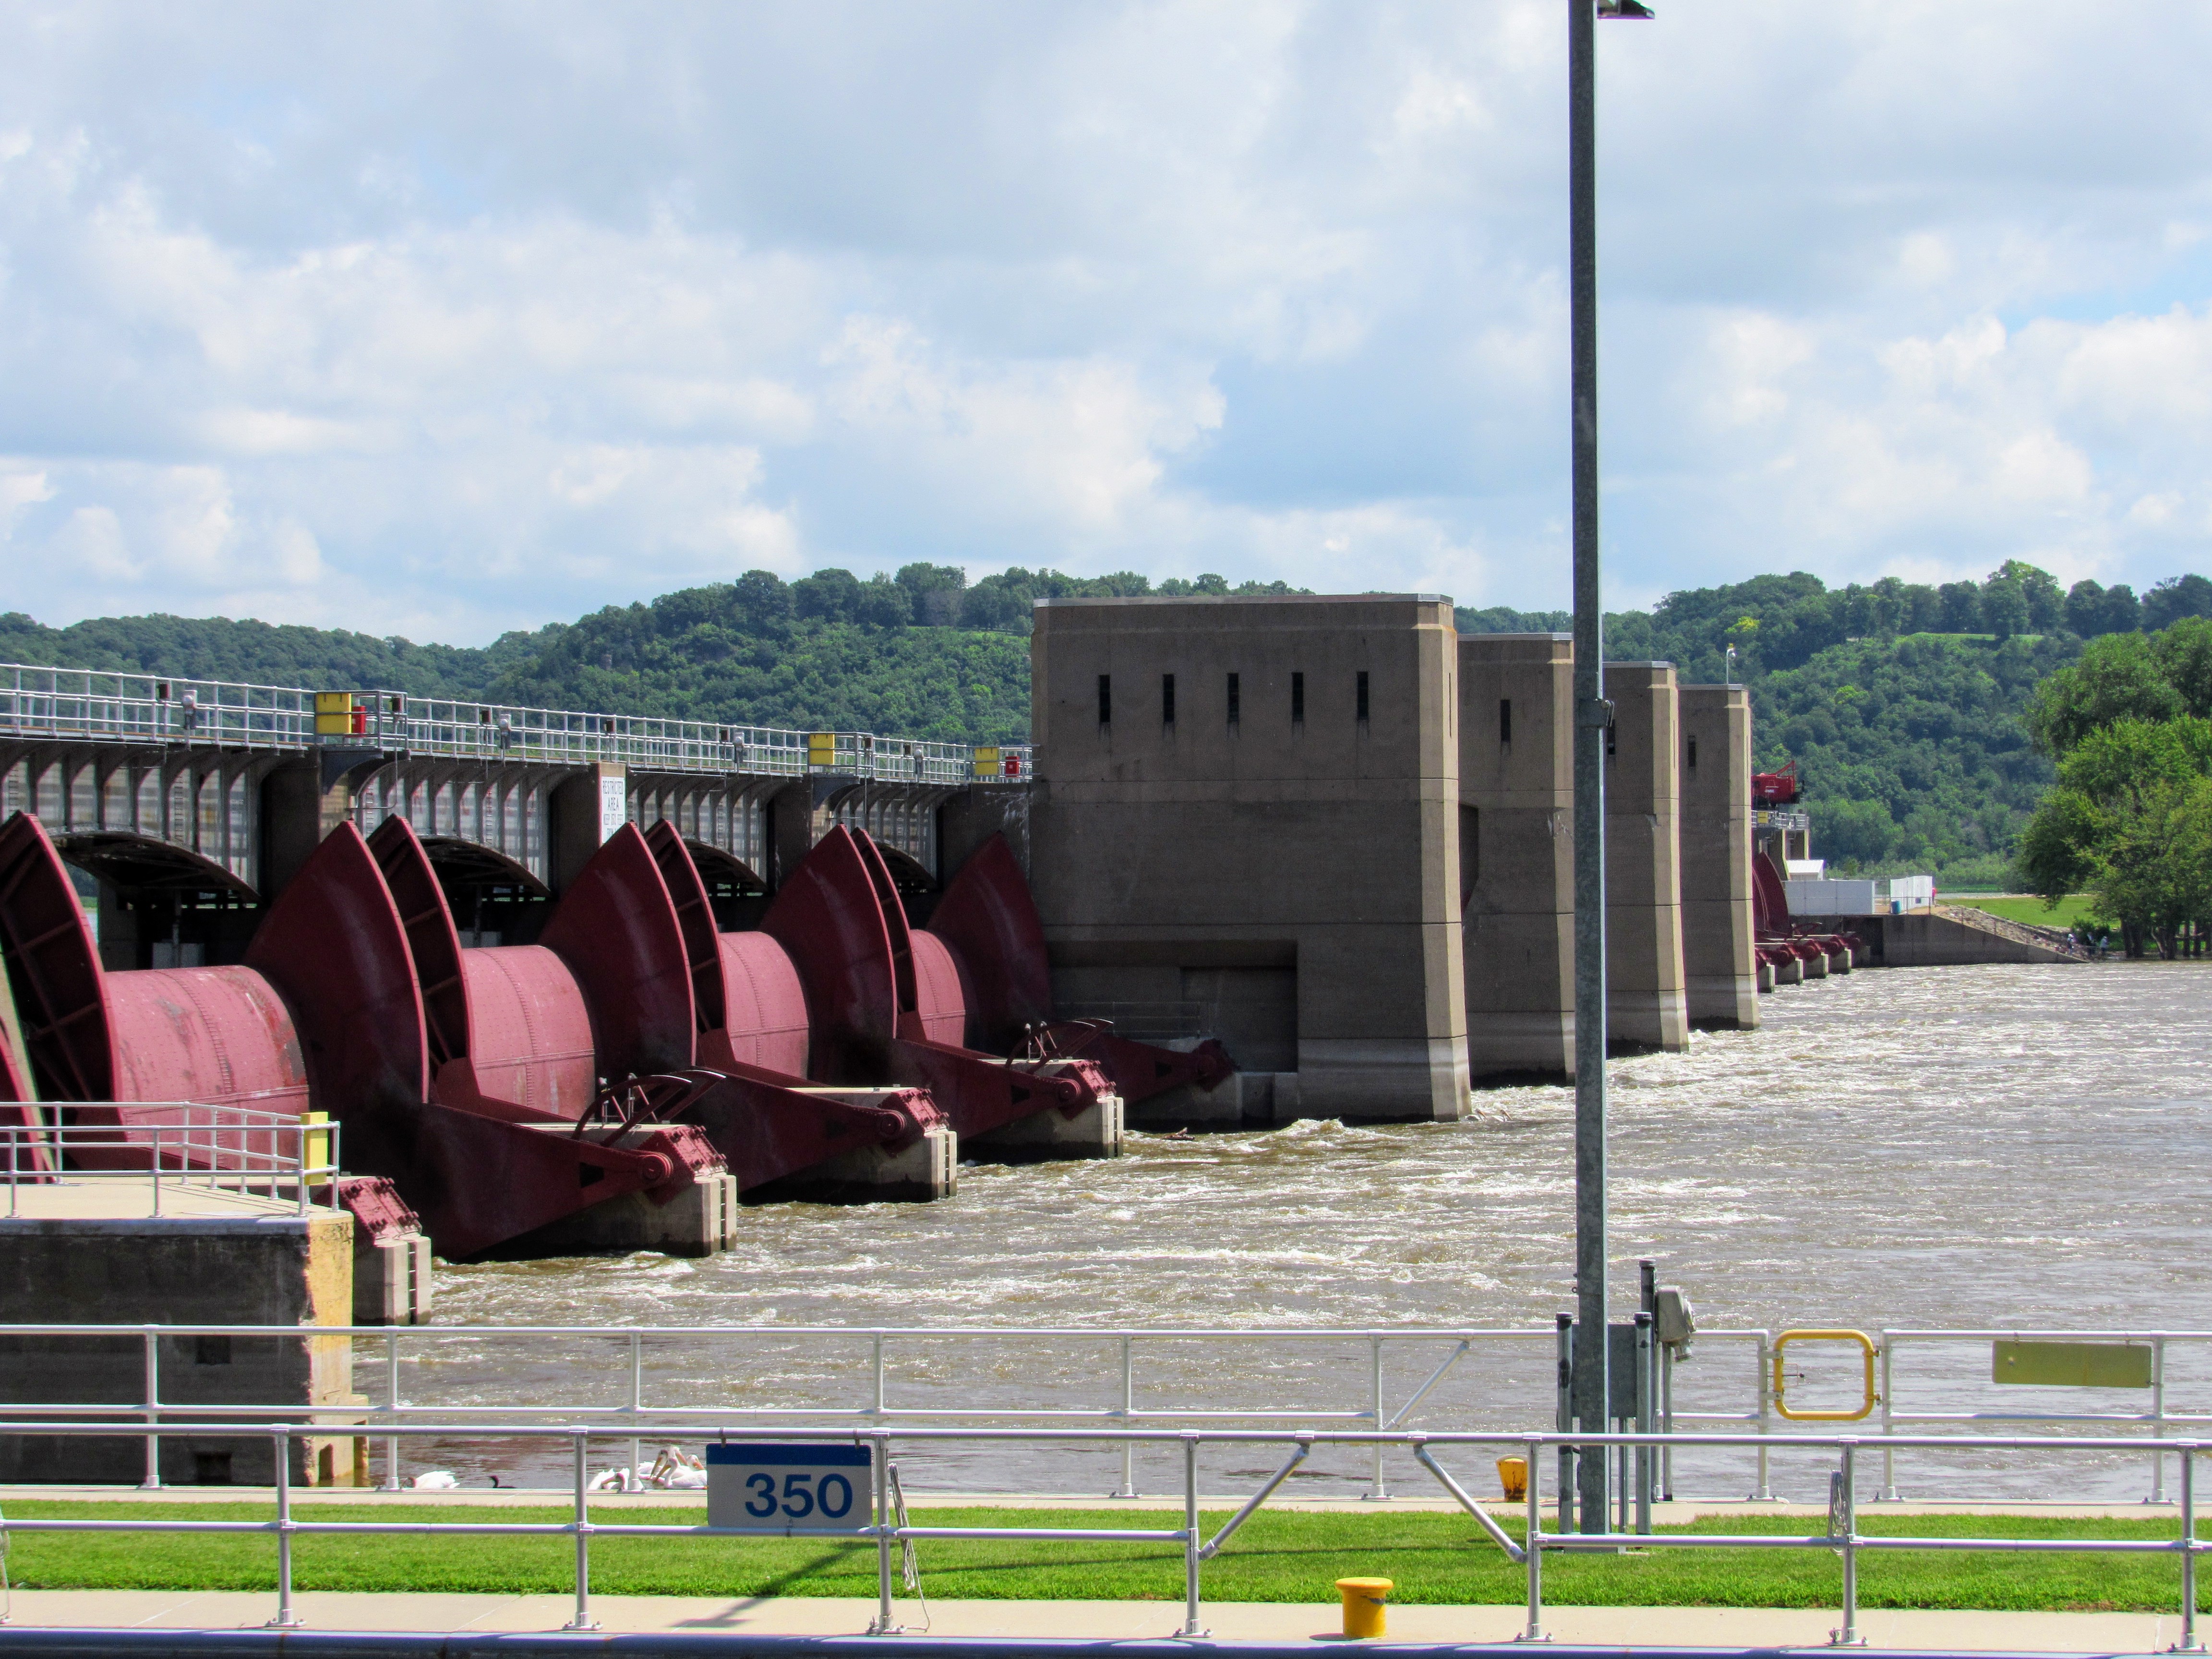 The movable dam at Lock and Dam #11 in Dubuque, Iowa is composed of 13 submersible Tainter gates. (Avery Gregurich)